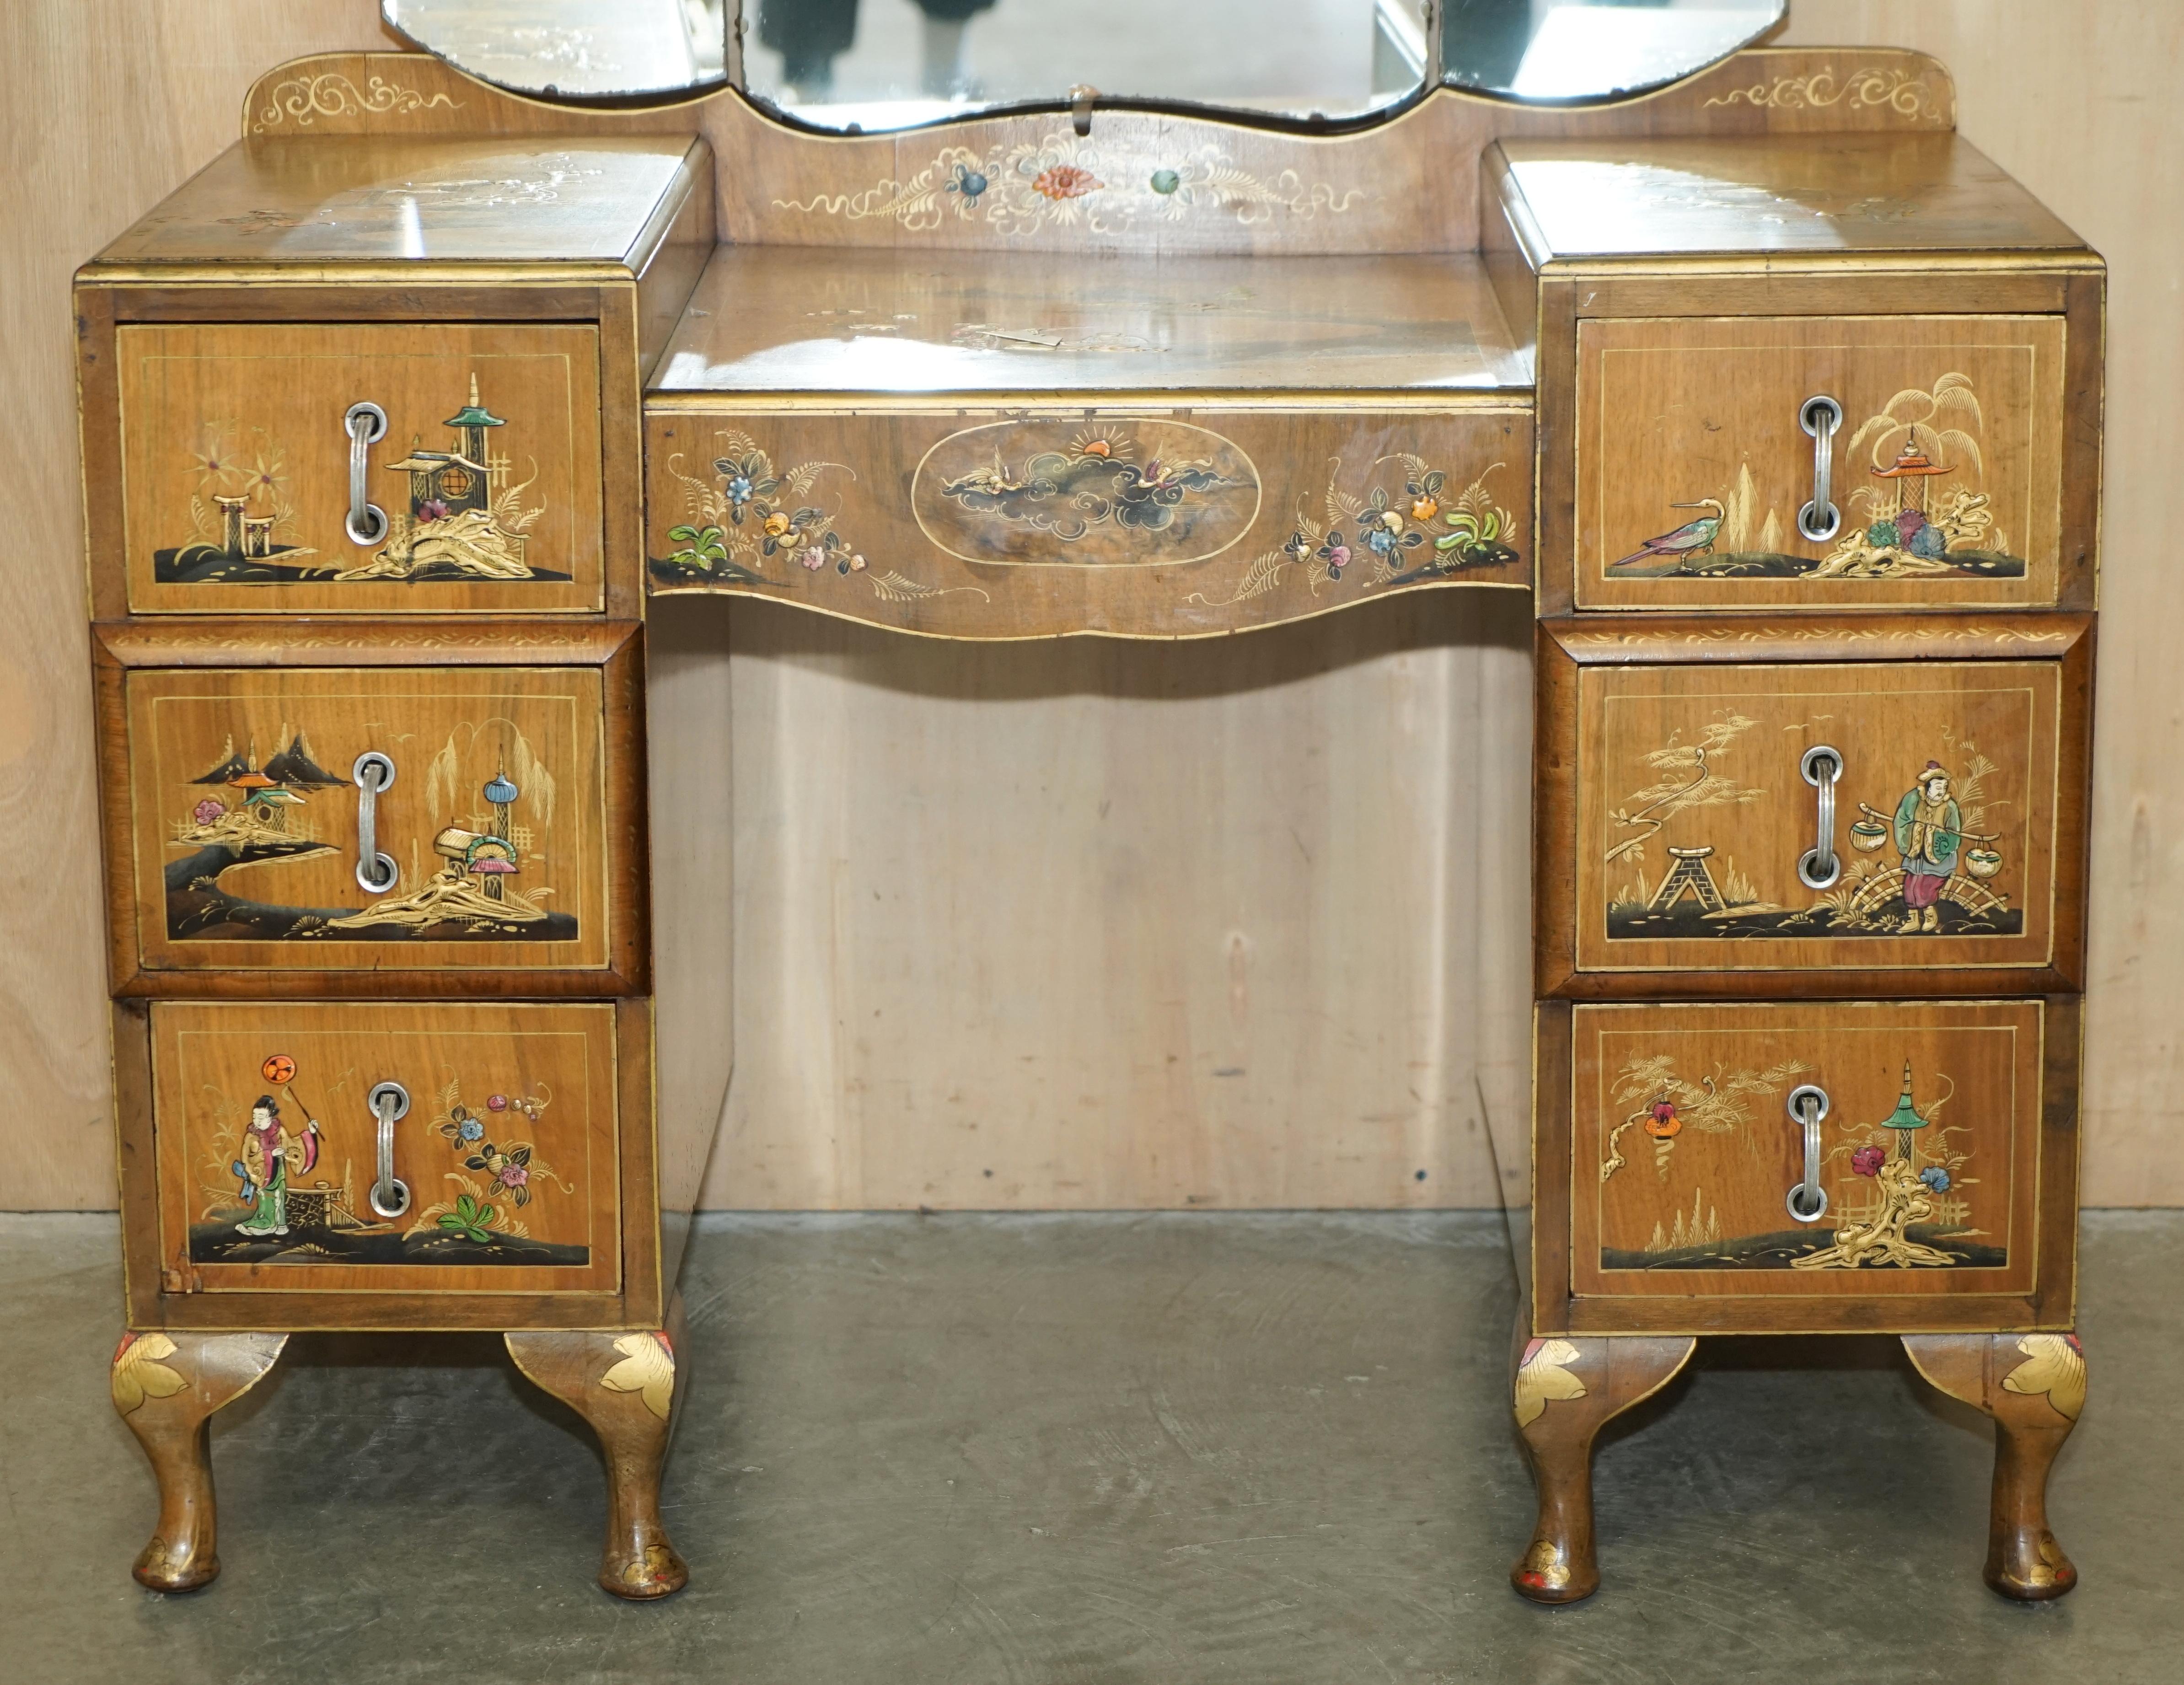 Mirror EXQUISITE CHiNESE EXPORT CHINOISERIE WALNUT DRESSING TABLE PART OF A SUITe For Sale